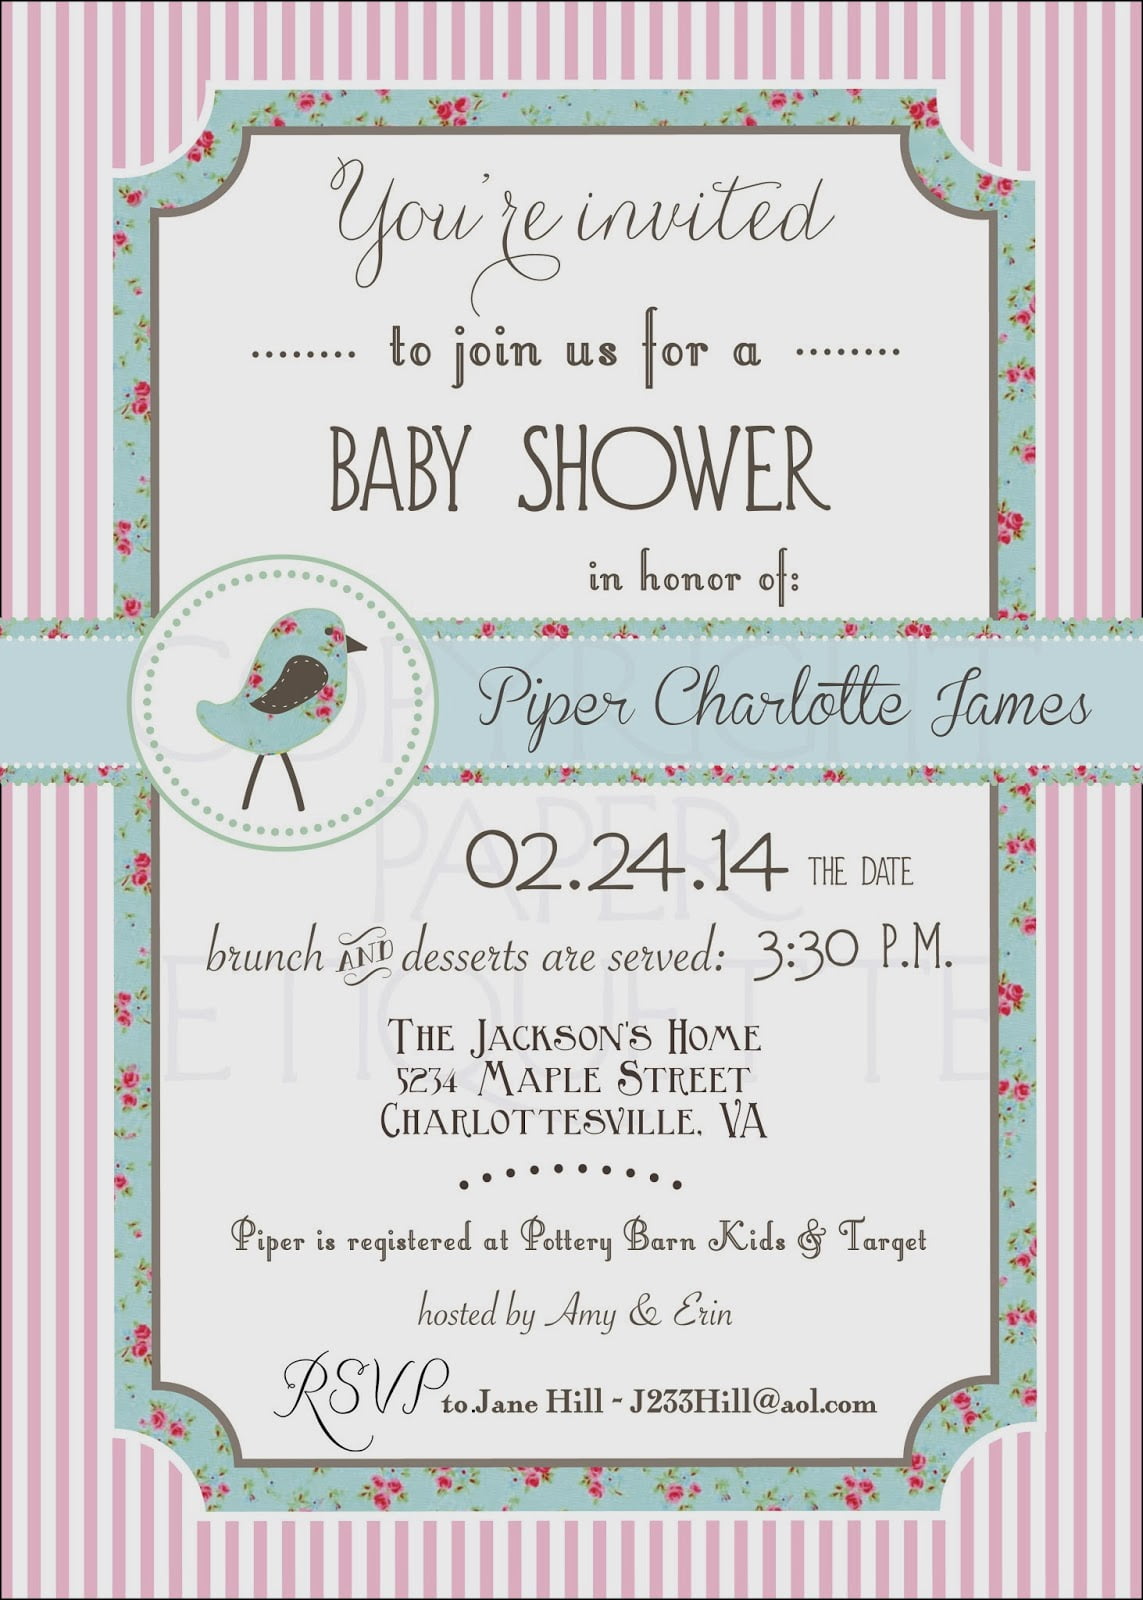 Baby Shower Invitations Etiquette | FREE Printable Baby ...